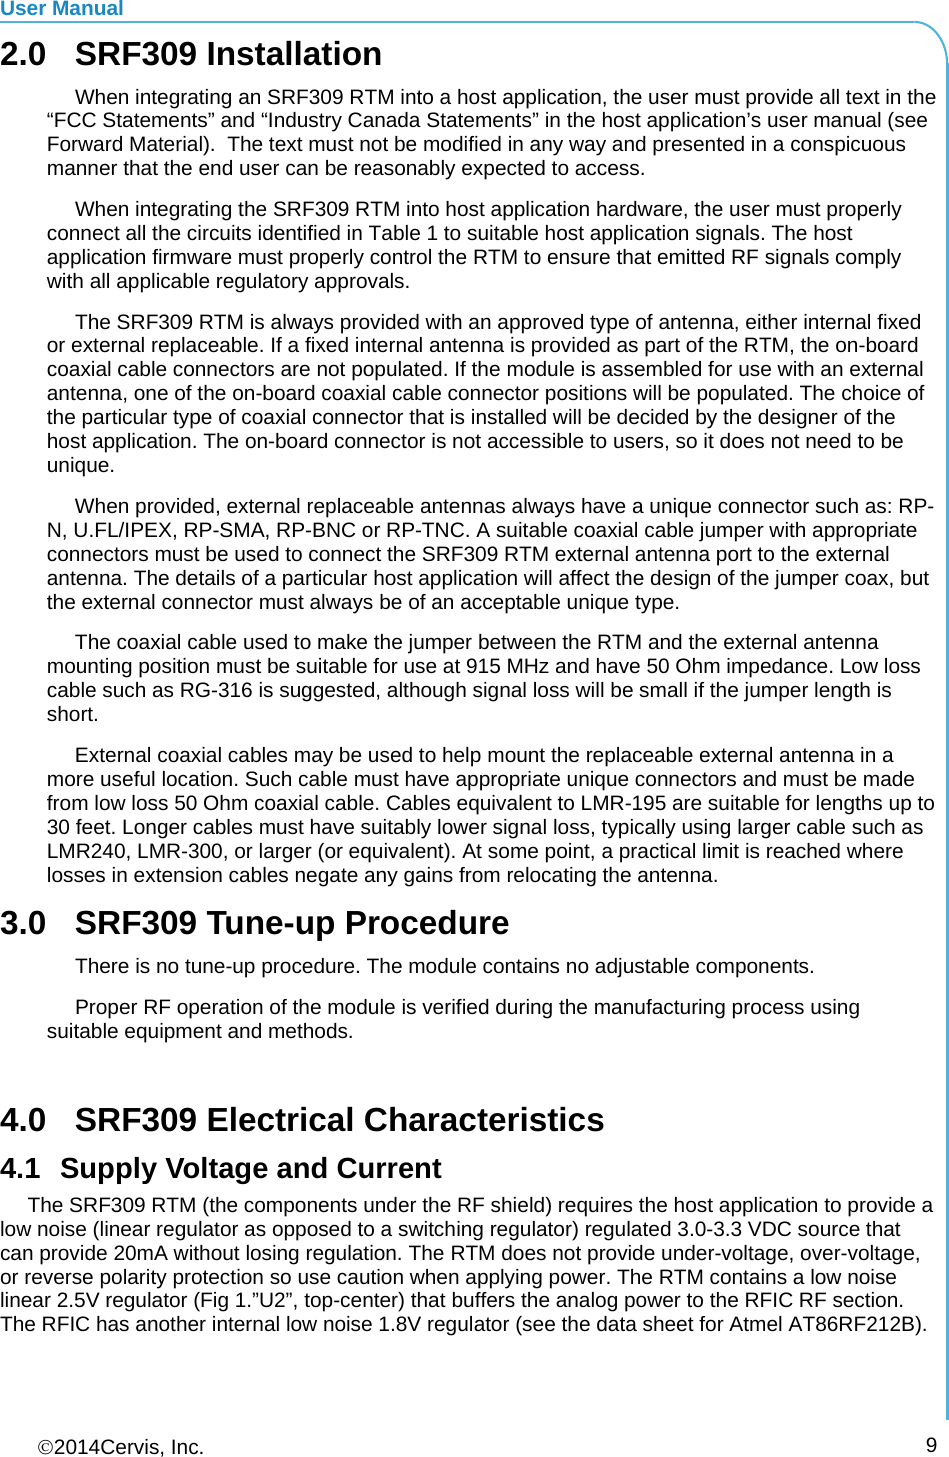 User Manual 2014Cervis, Inc.      92.0 SRF309 Installation   When integrating an SRF309 RTM into a host application, the user must provide all text in the “FCC Statements” and “Industry Canada Statements” in the host application’s user manual (see Forward Material).  The text must not be modified in any way and presented in a conspicuous manner that the end user can be reasonably expected to access.   When integrating the SRF309 RTM into host application hardware, the user must properly connect all the circuits identified in Table 1 to suitable host application signals. The host application firmware must properly control the RTM to ensure that emitted RF signals comply with all applicable regulatory approvals.   The SRF309 RTM is always provided with an approved type of antenna, either internal fixed or external replaceable. If a fixed internal antenna is provided as part of the RTM, the on-board coaxial cable connectors are not populated. If the module is assembled for use with an external antenna, one of the on-board coaxial cable connector positions will be populated. The choice of the particular type of coaxial connector that is installed will be decided by the designer of the host application. The on-board connector is not accessible to users, so it does not need to be unique. When provided, external replaceable antennas always have a unique connector such as: RP-N, U.FL/IPEX, RP-SMA, RP-BNC or RP-TNC. A suitable coaxial cable jumper with appropriate connectors must be used to connect the SRF309 RTM external antenna port to the external antenna. The details of a particular host application will affect the design of the jumper coax, but the external connector must always be of an acceptable unique type. The coaxial cable used to make the jumper between the RTM and the external antenna mounting position must be suitable for use at 915 MHz and have 50 Ohm impedance. Low loss cable such as RG-316 is suggested, although signal loss will be small if the jumper length is short. External coaxial cables may be used to help mount the replaceable external antenna in a more useful location. Such cable must have appropriate unique connectors and must be made from low loss 50 Ohm coaxial cable. Cables equivalent to LMR-195 are suitable for lengths up to 30 feet. Longer cables must have suitably lower signal loss, typically using larger cable such as LMR240, LMR-300, or larger (or equivalent). At some point, a practical limit is reached where losses in extension cables negate any gains from relocating the antenna. 3.0  SRF309 Tune-up Procedure There is no tune-up procedure. The module contains no adjustable components. Proper RF operation of the module is verified during the manufacturing process using suitable equipment and methods.  4.0  SRF309 Electrical Characteristics 4.1  Supply Voltage and Current The SRF309 RTM (the components under the RF shield) requires the host application to provide a low noise (linear regulator as opposed to a switching regulator) regulated 3.0-3.3 VDC source that can provide 20mA without losing regulation. The RTM does not provide under-voltage, over-voltage, or reverse polarity protection so use caution when applying power. The RTM contains a low noise linear 2.5V regulator (Fig 1.”U2”, top-center) that buffers the analog power to the RFIC RF section. The RFIC has another internal low noise 1.8V regulator (see the data sheet for Atmel AT86RF212B). 